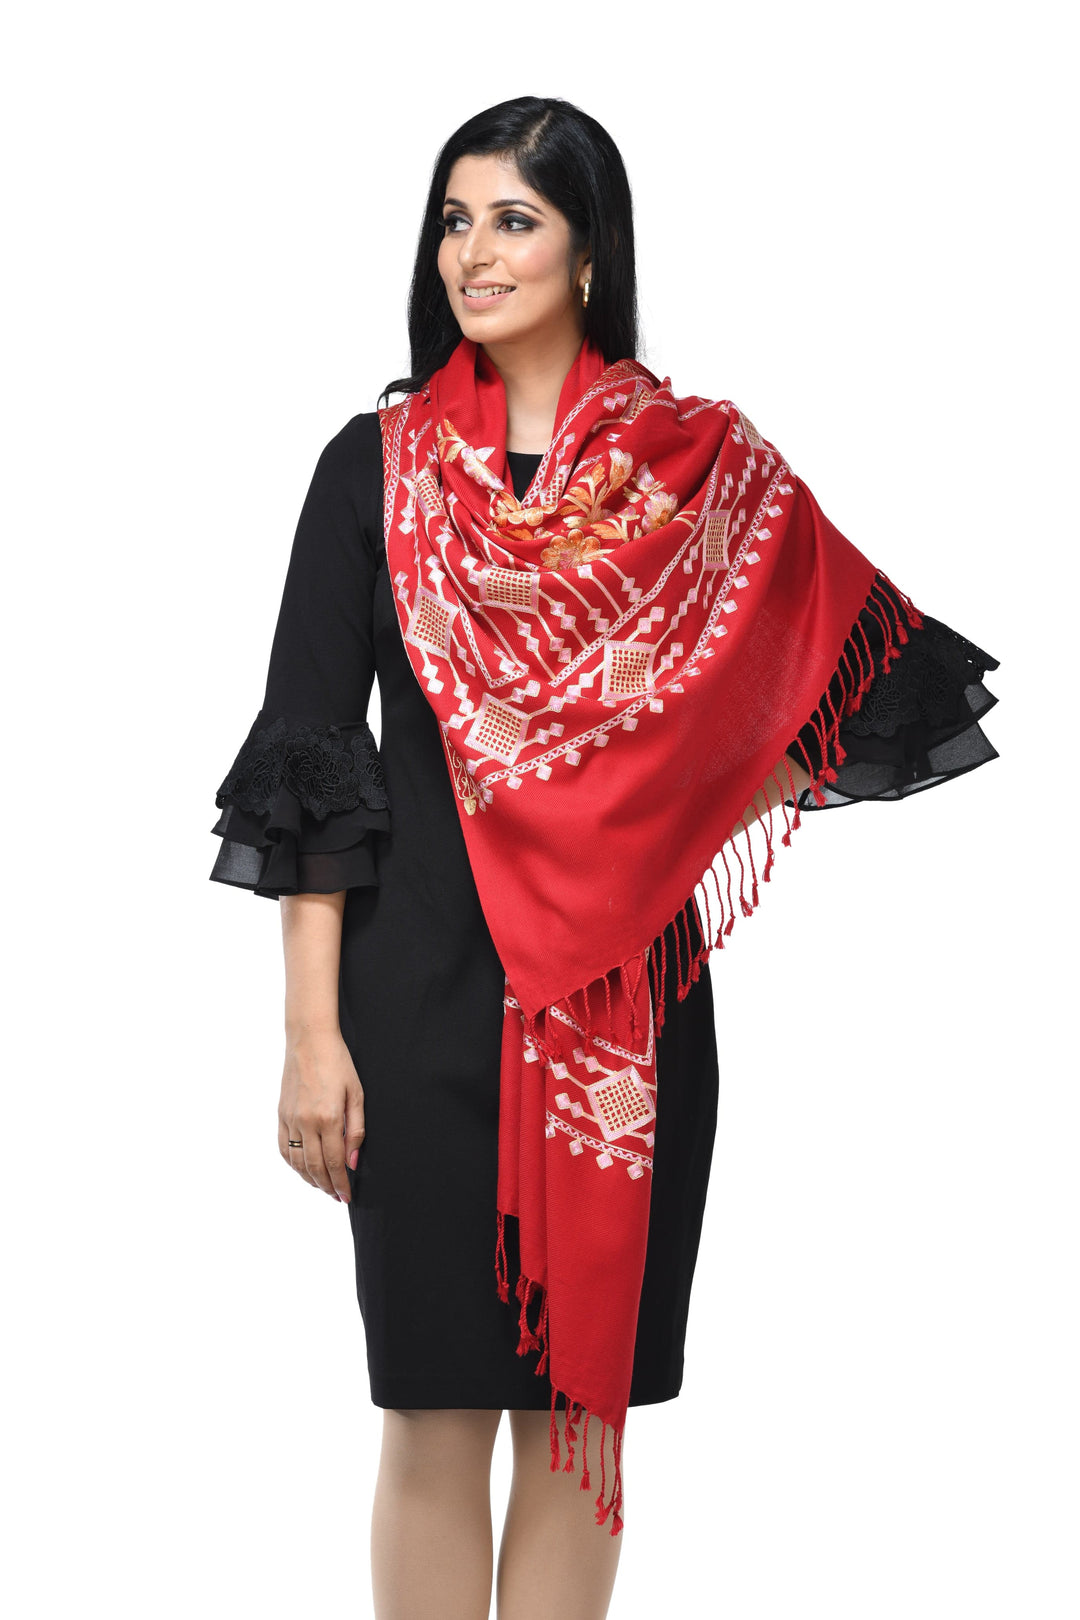 Pashwool Womens Stoles and Scarves Scarf Pashwool Womens Kashmiri Embroidery Stole, Woollen Stole, Soft And Warm,Maroon